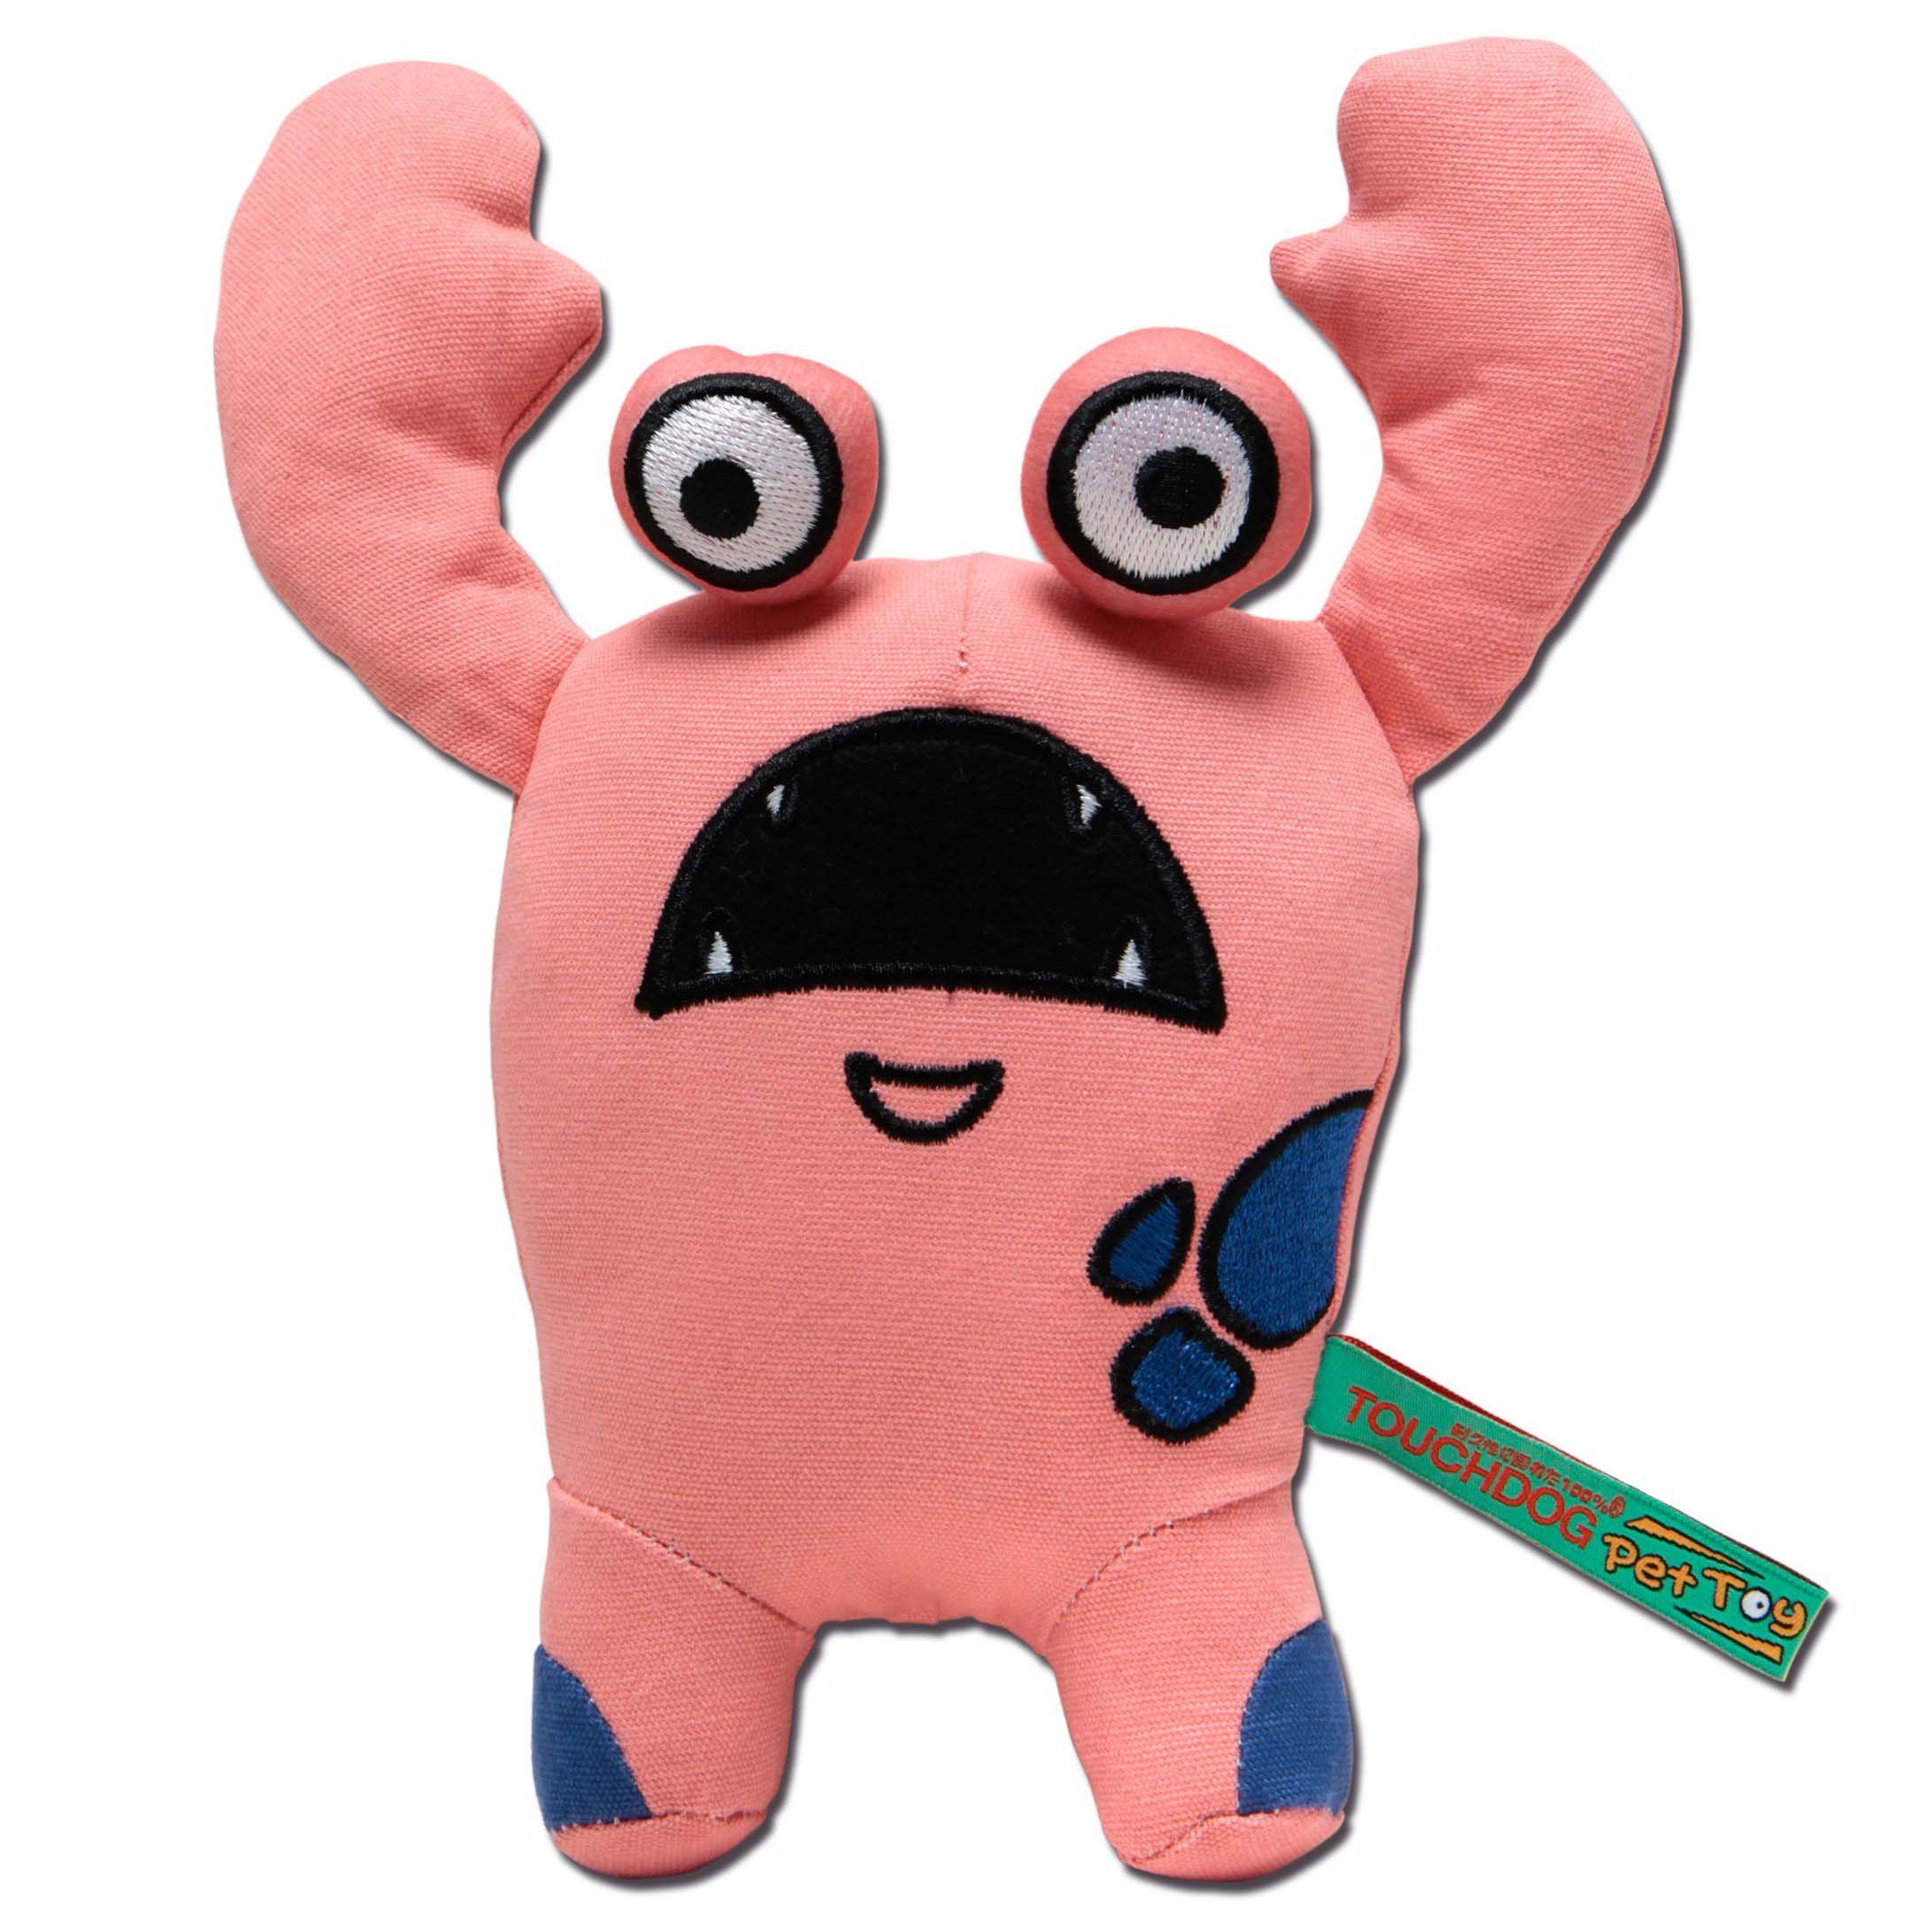 Touchdog Cartoon Up-for-Crabs Monster Plush Dog Toy Pink 